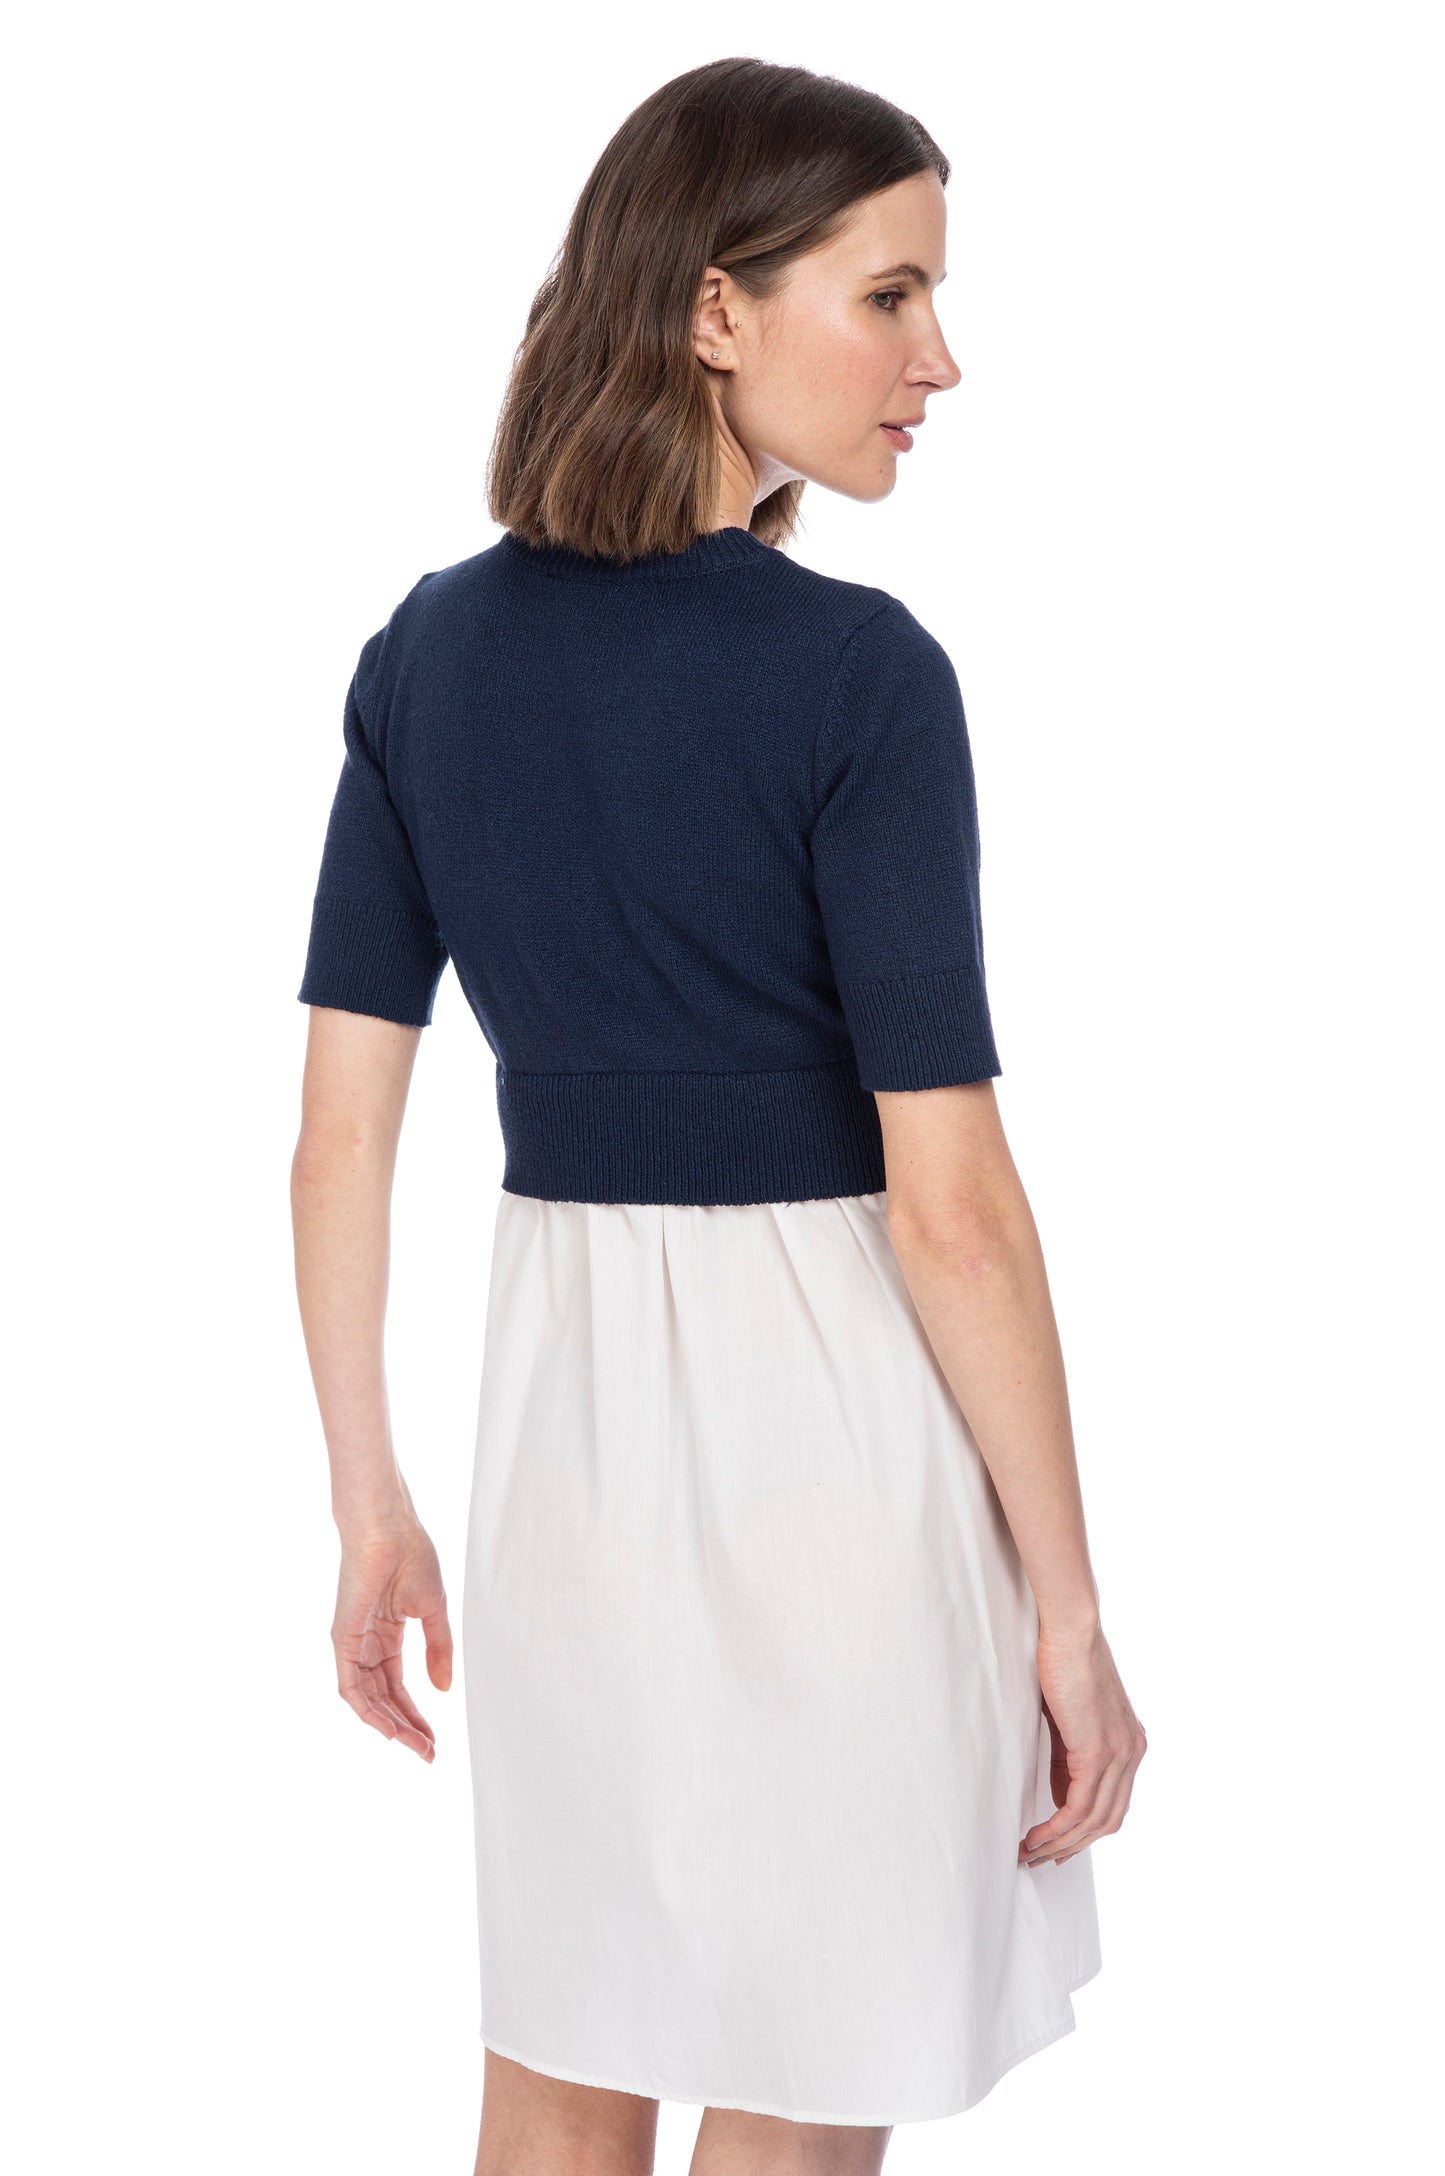 A woman posing sideways, wearing a half-sleeved navy blue striped sweater vest from B Collection by Bobeau and a white poplin knee-length skirt.